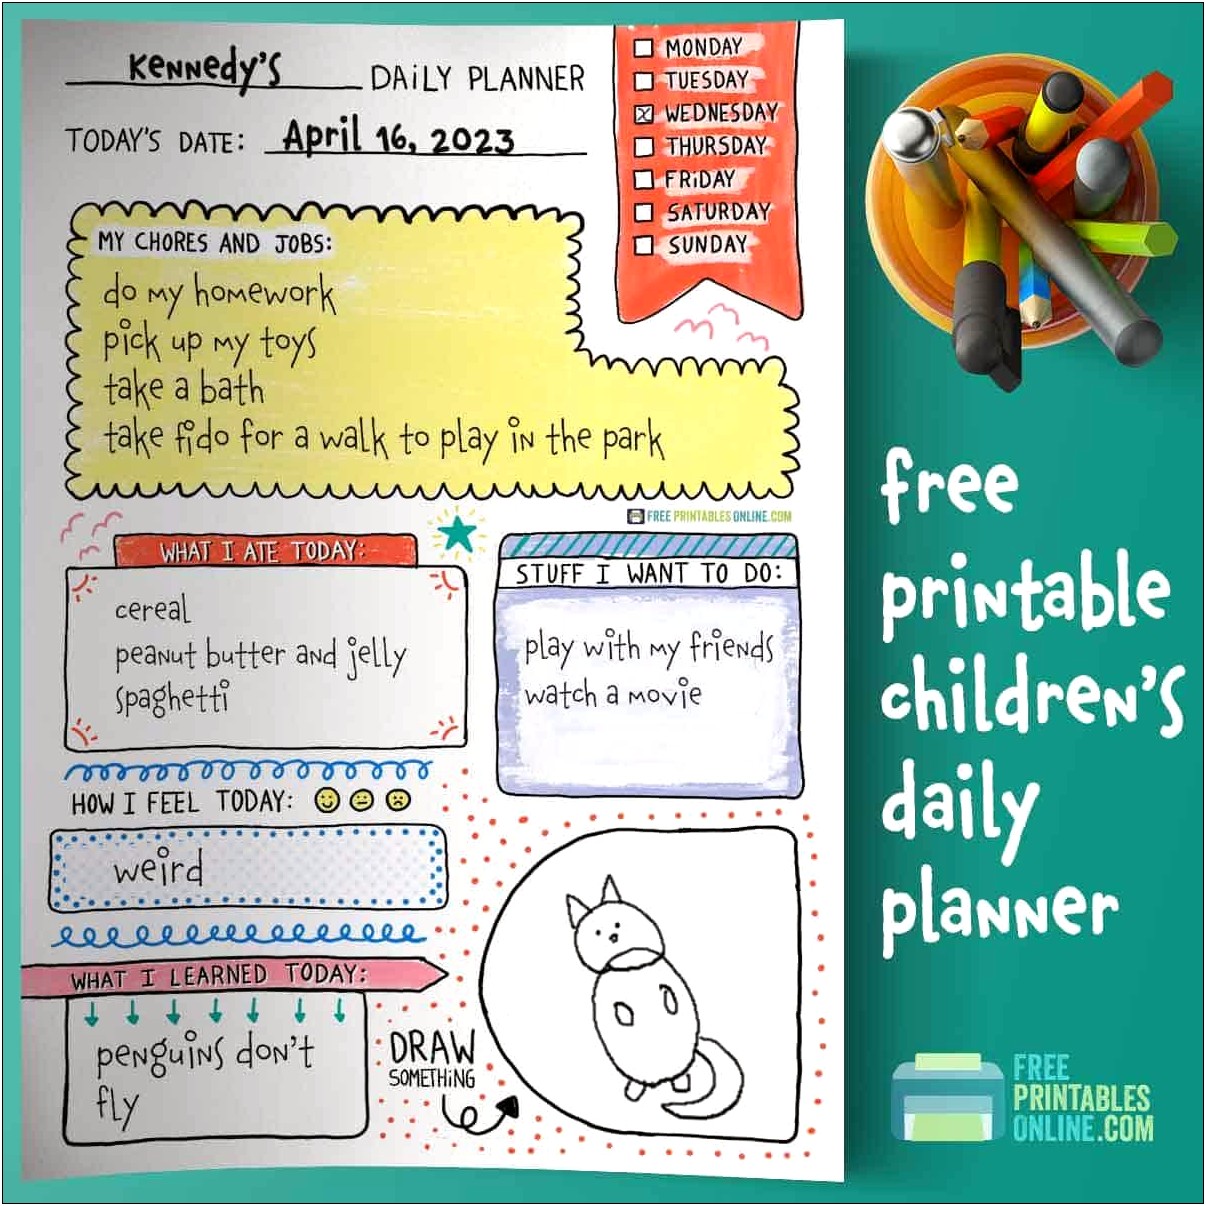 daily-schedule-free-printable-daily-planner-template-resume-example-gallery